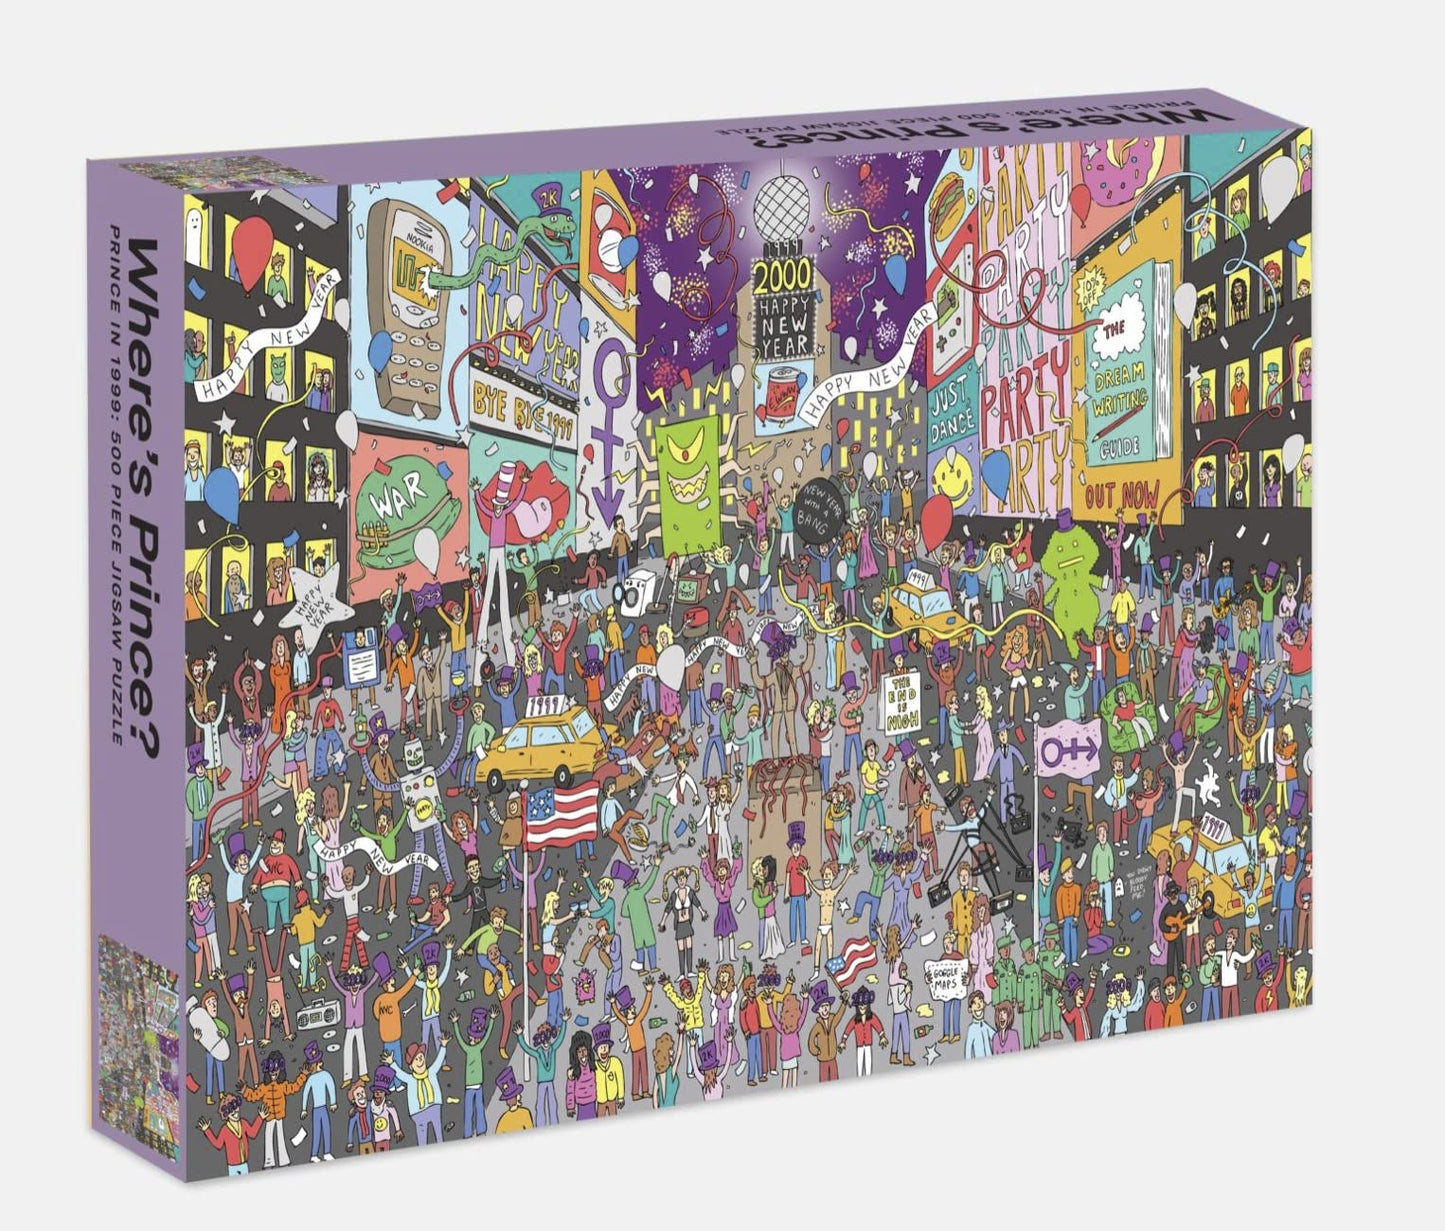 Where's Prince? Prince in 1999 500pc Puzzle